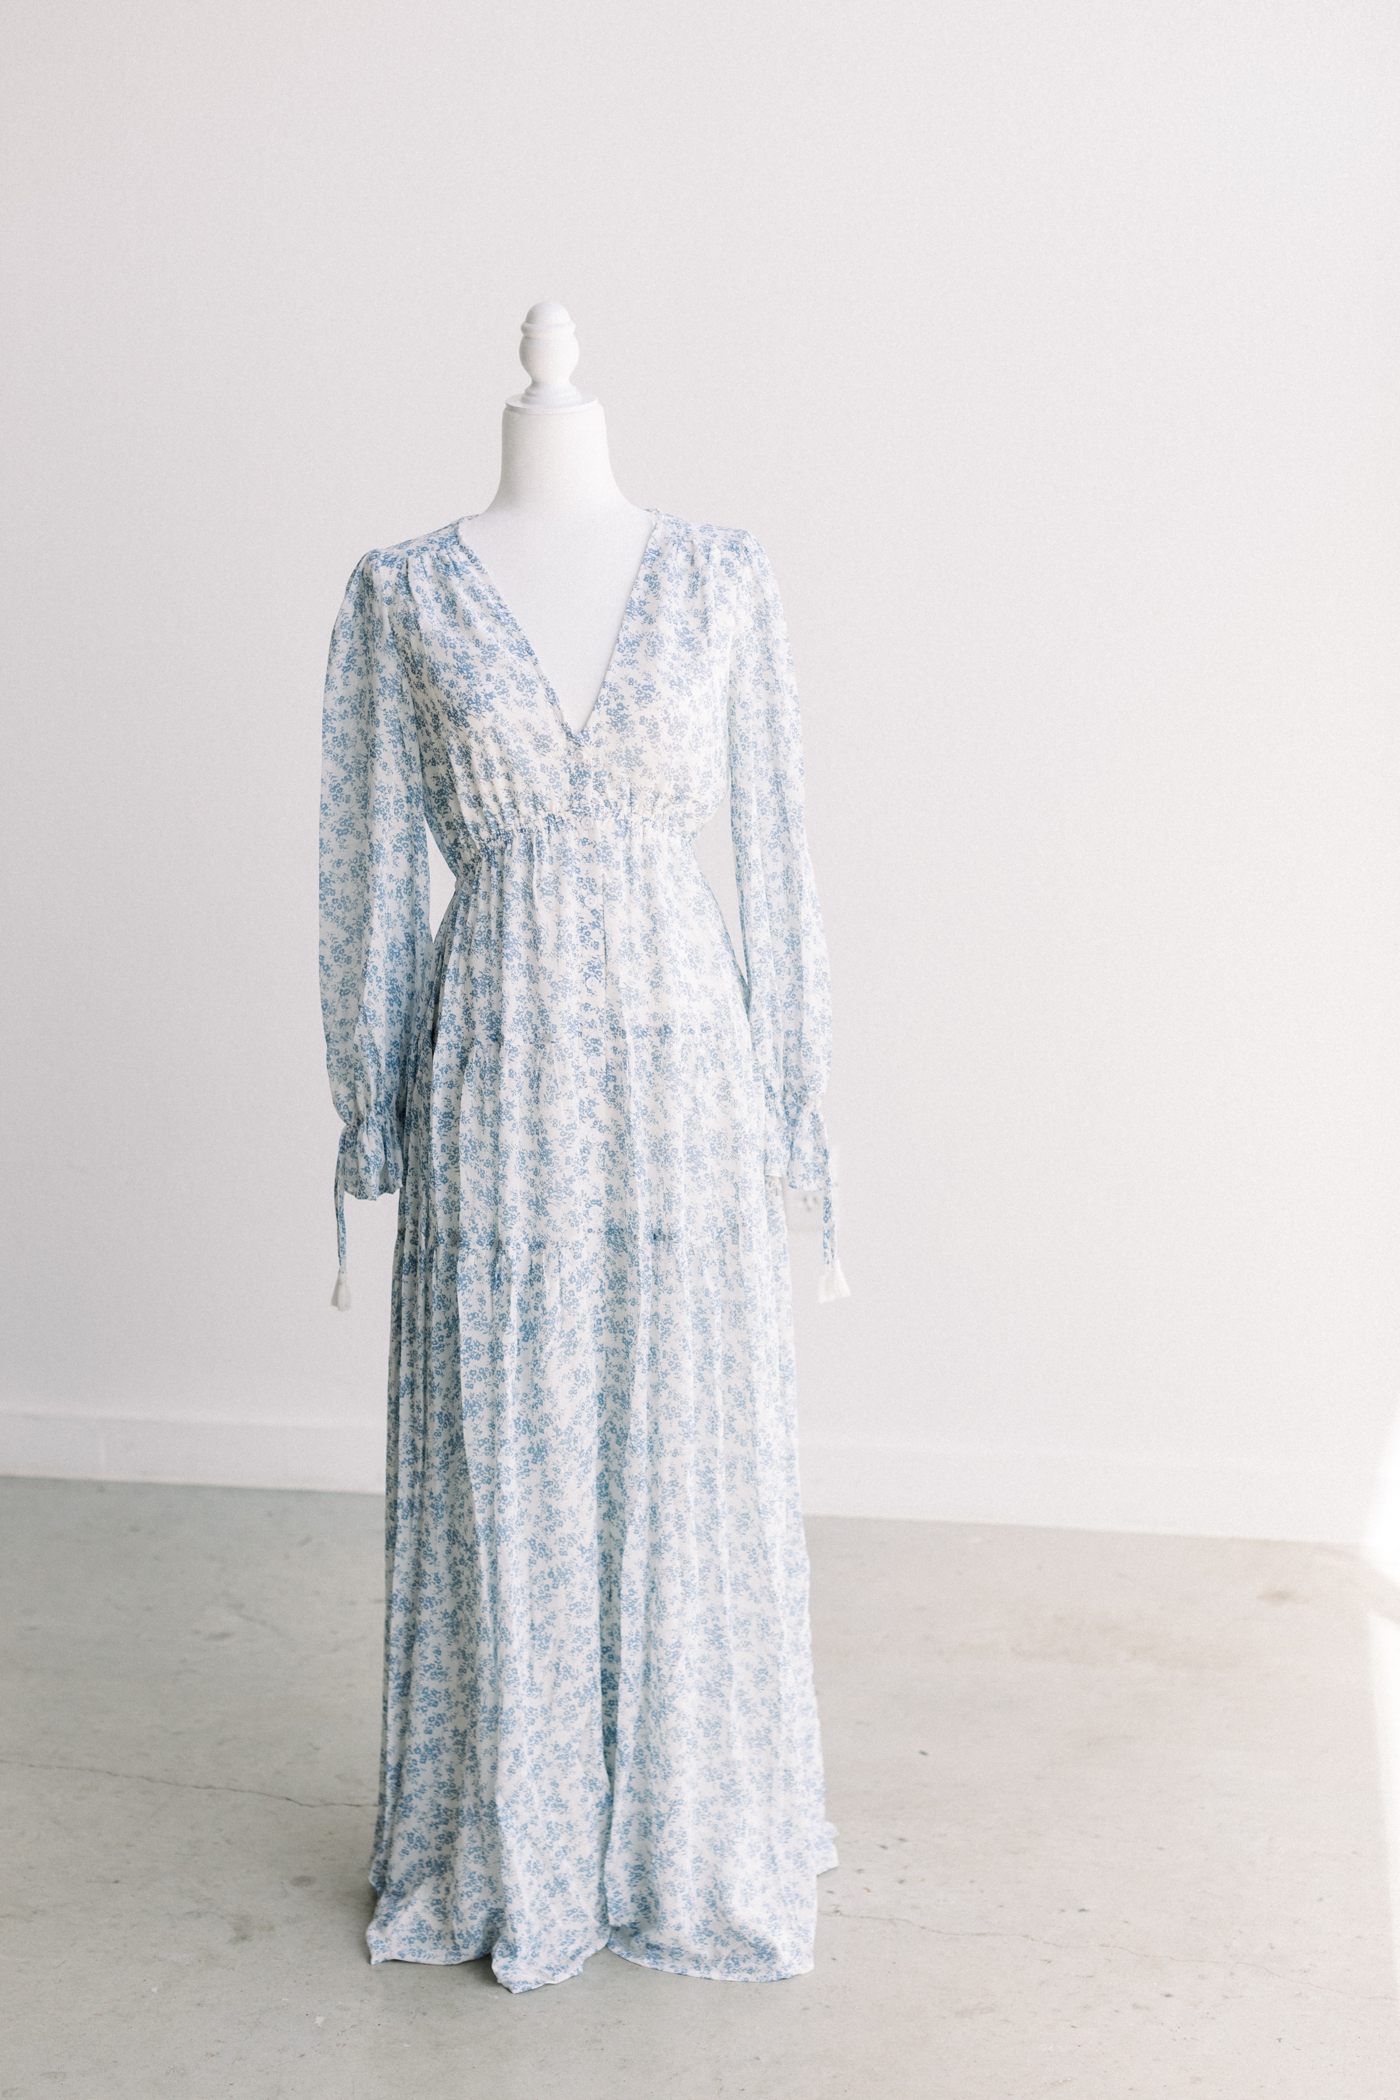 Blue and white floral maxi dress with sleeves provided by the Sana Ahmed Photography Client Wardrobe.